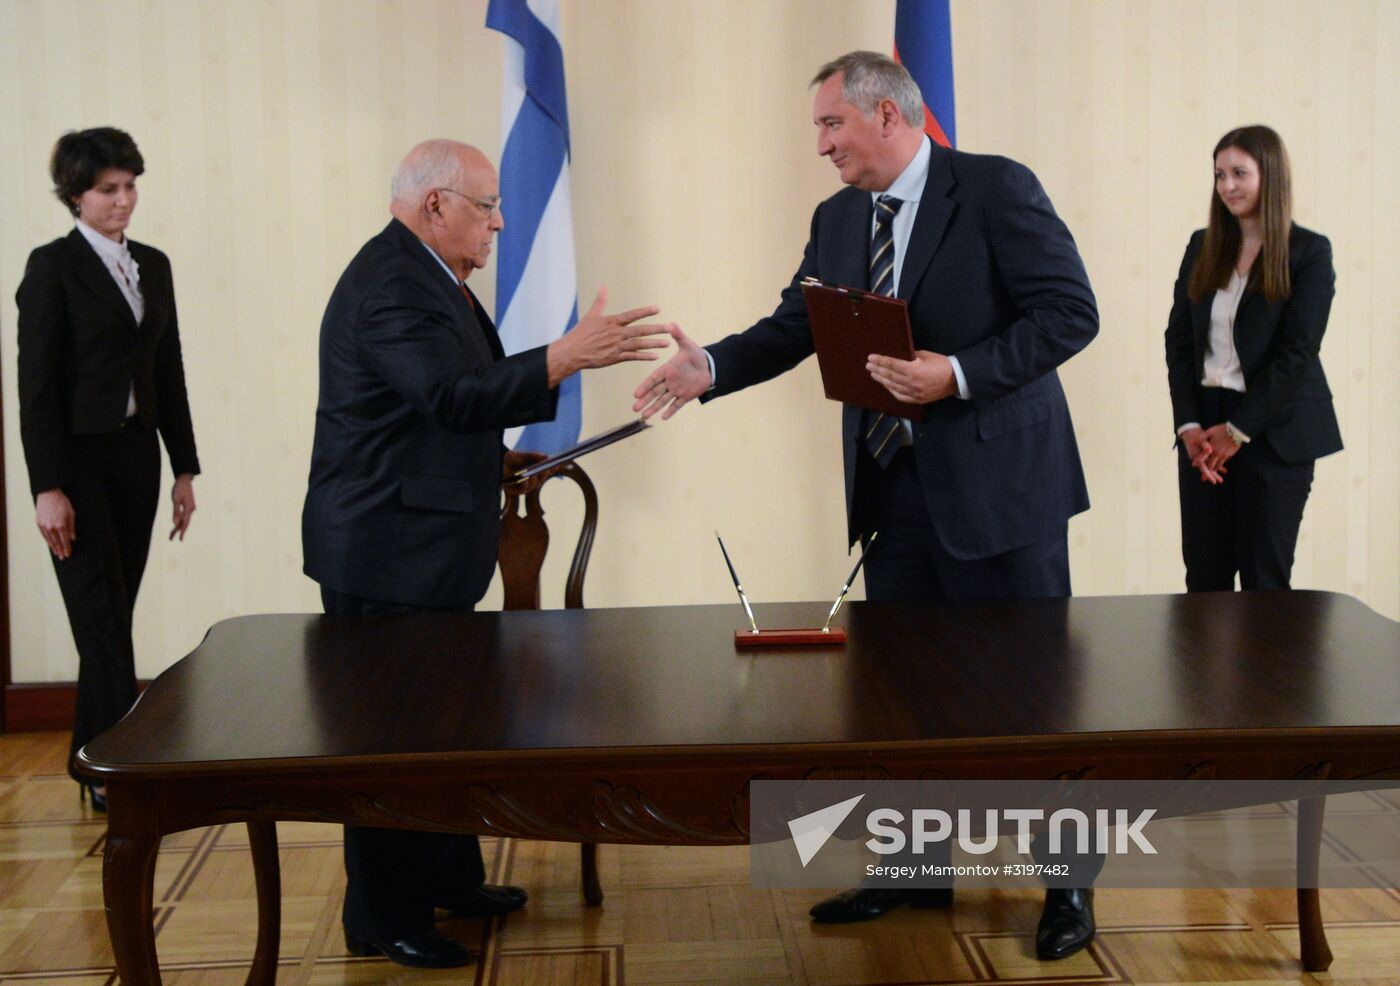 Deputy Prime Minister Dmitry Rogozin takes part in Russian-Cuban intergovernmental commission